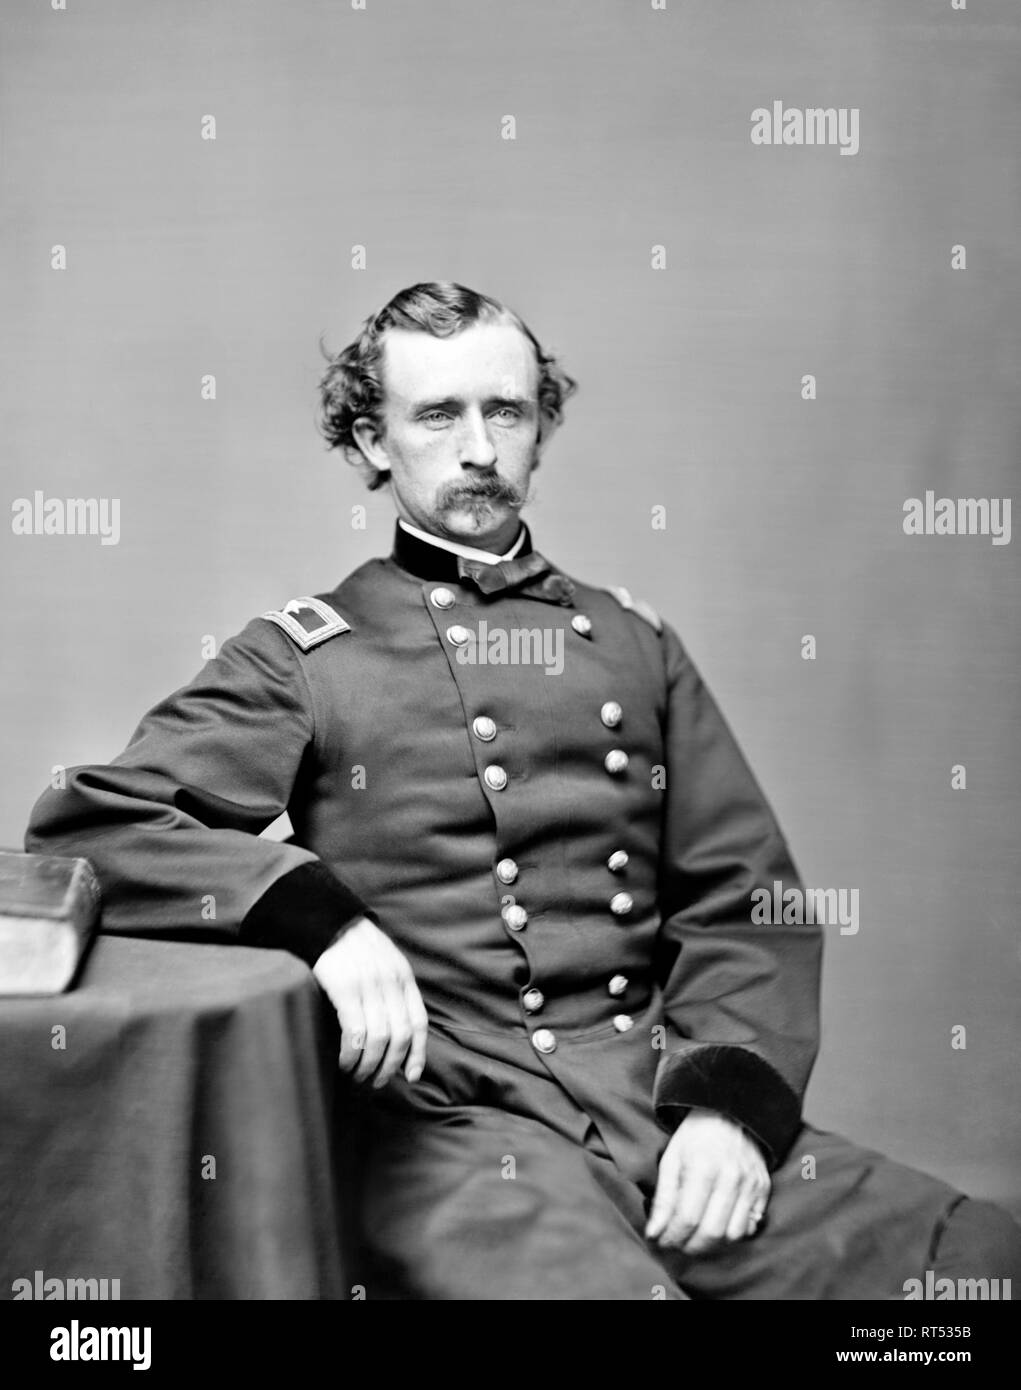 American Civil War portrait of General George Armstrong Custer, 1864. Stock Photo